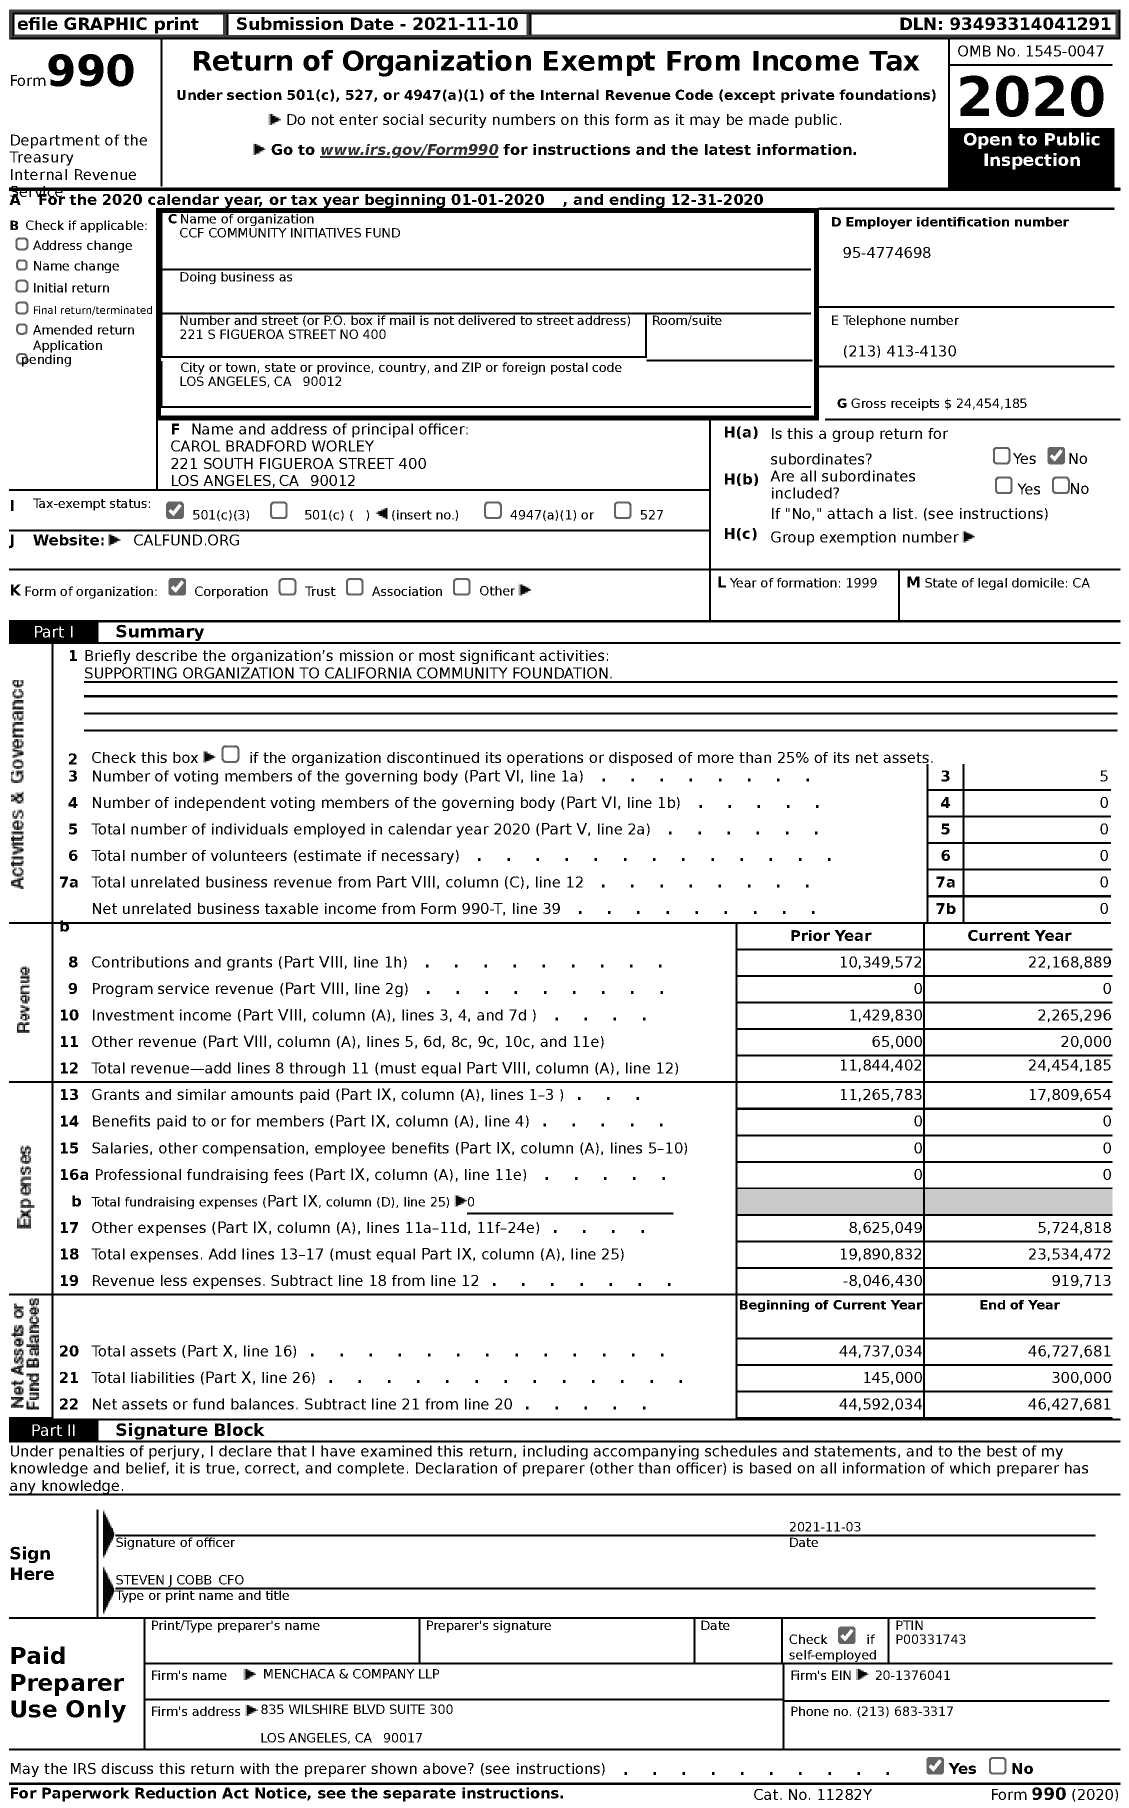 Image of first page of 2020 Form 990 for CCF Community Initiatives Fund